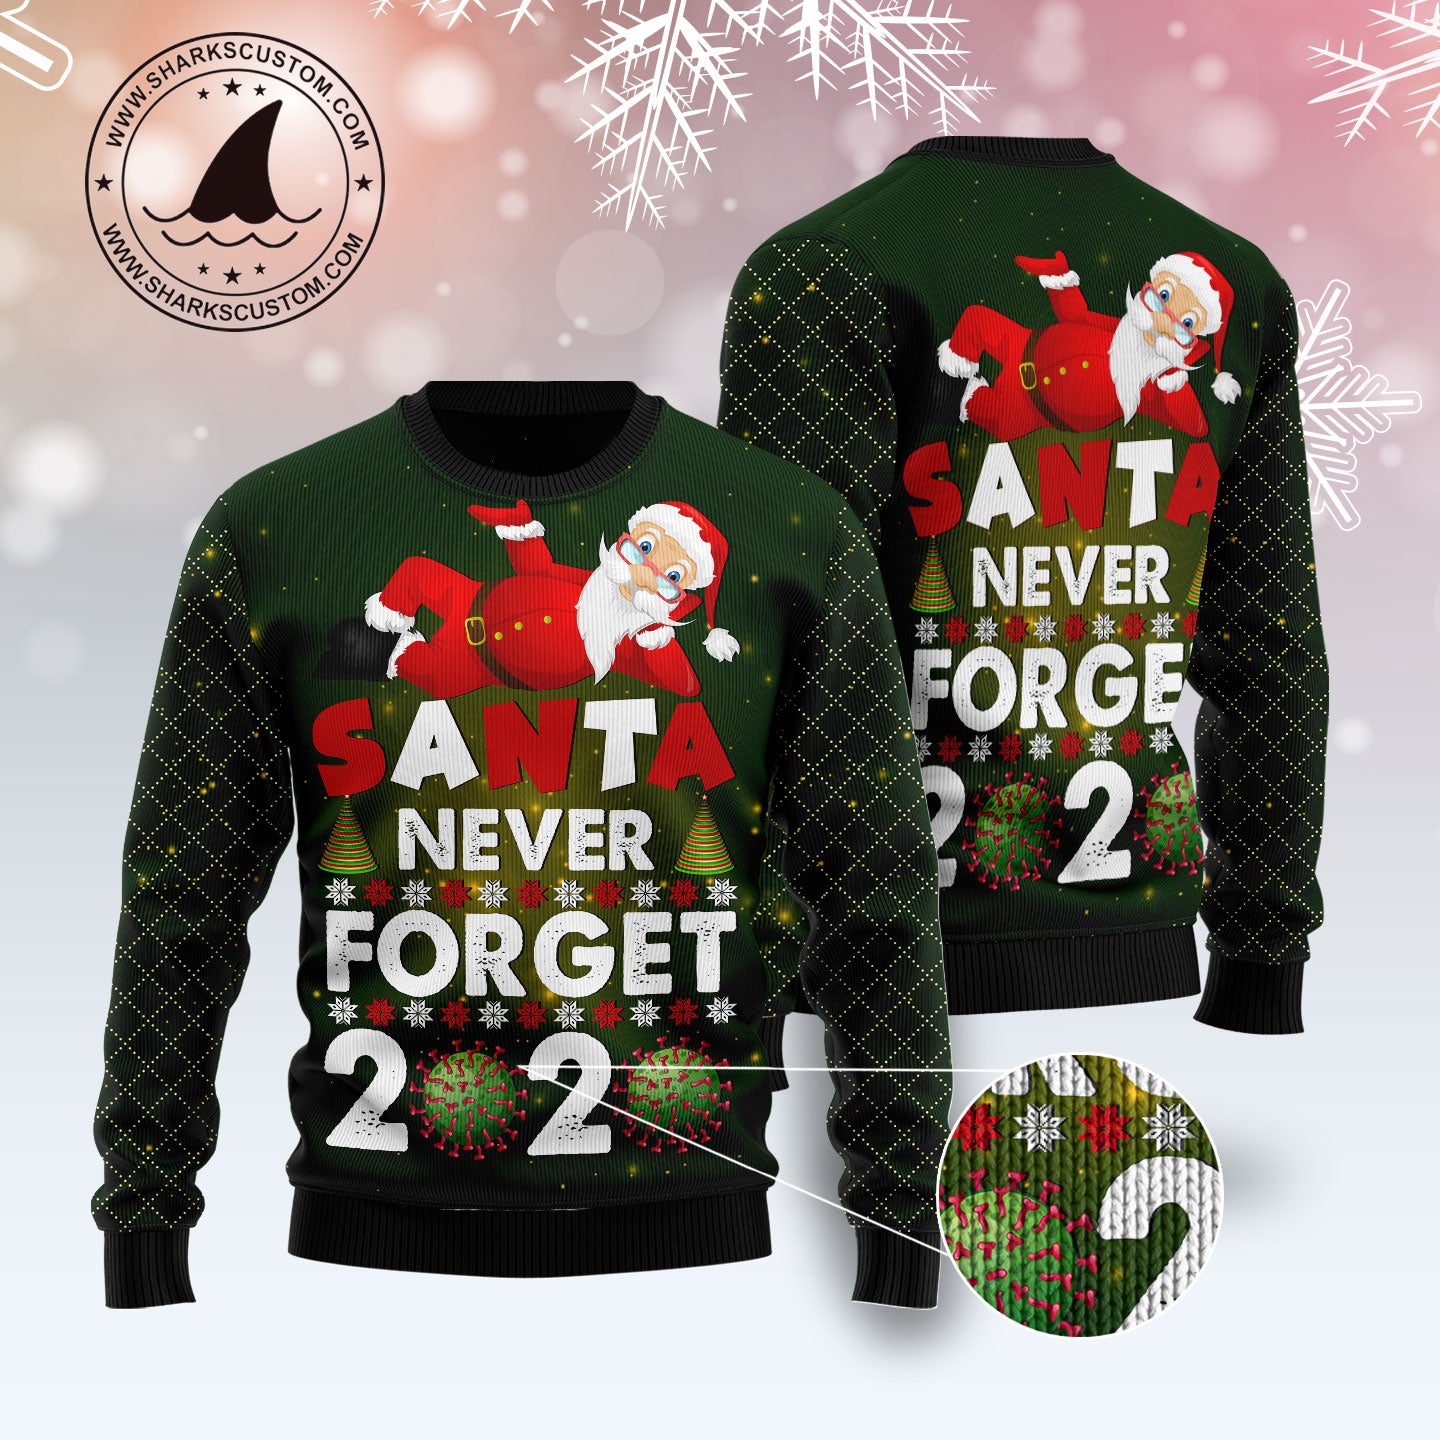 Santa Never Forget 2020 TY2110 Ugly Christmas Sweater